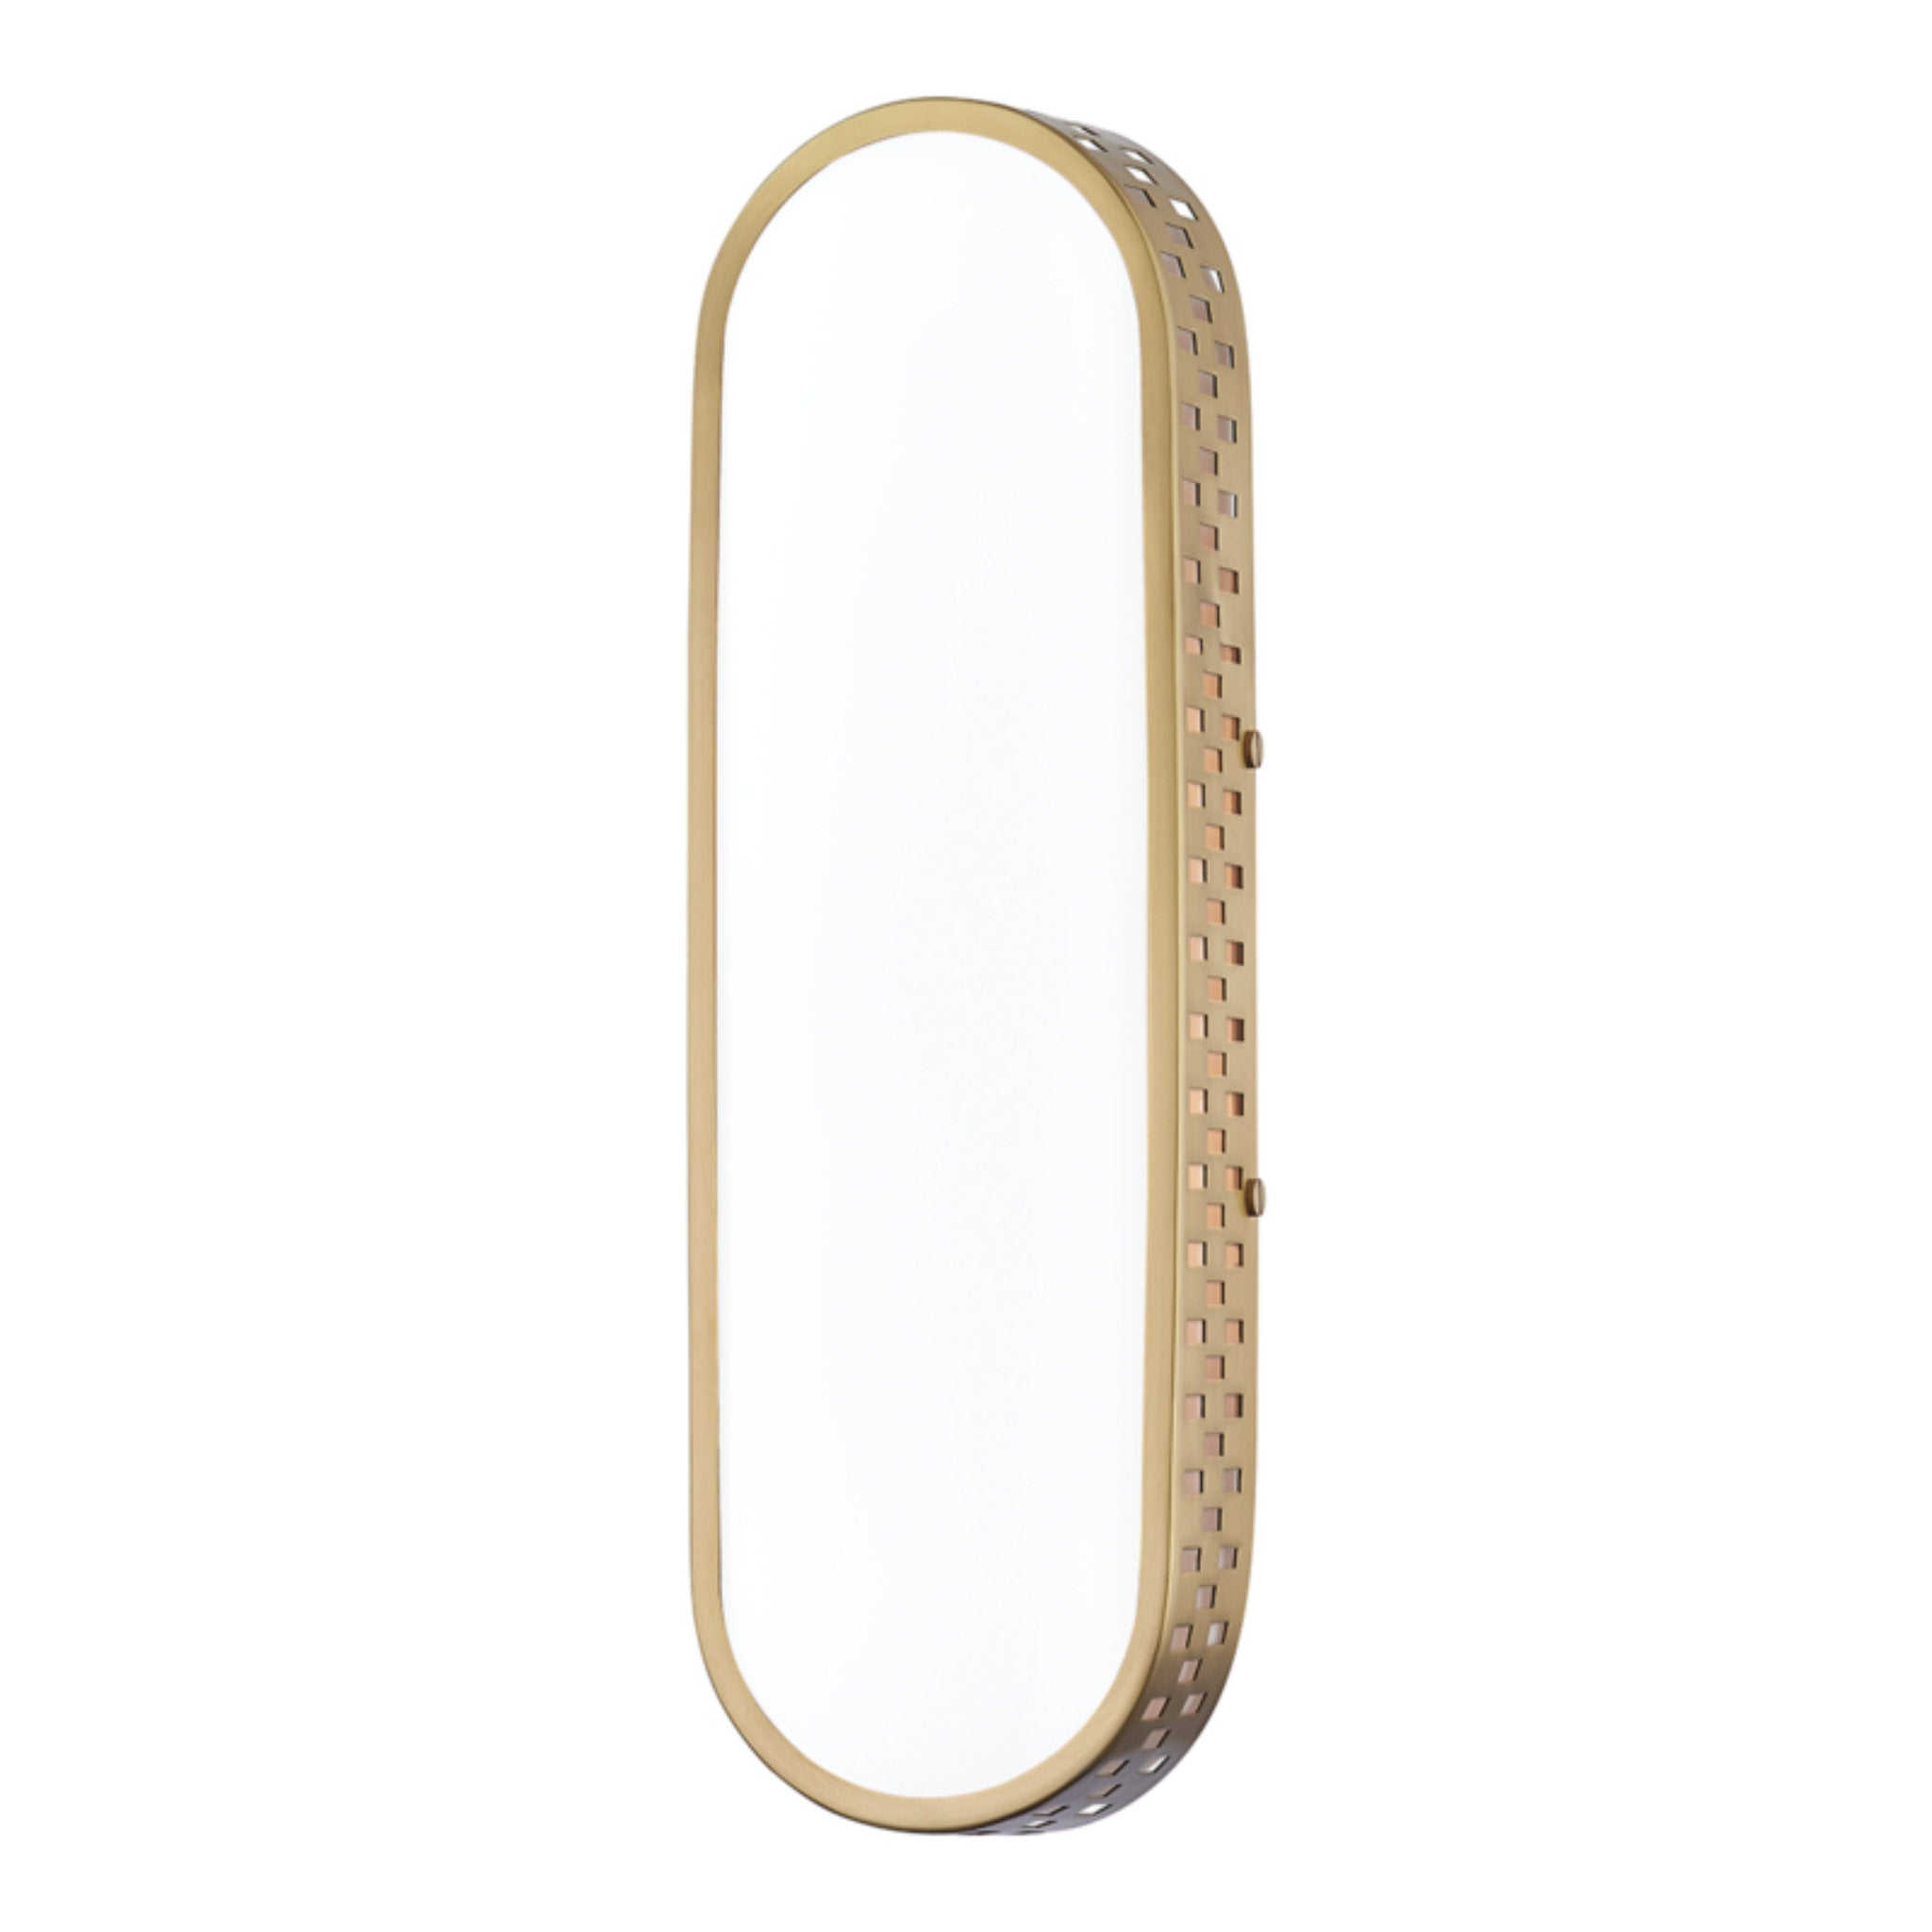 Phoebe 2-Light Wall Sconce in Aged Brass by Justin Crocker